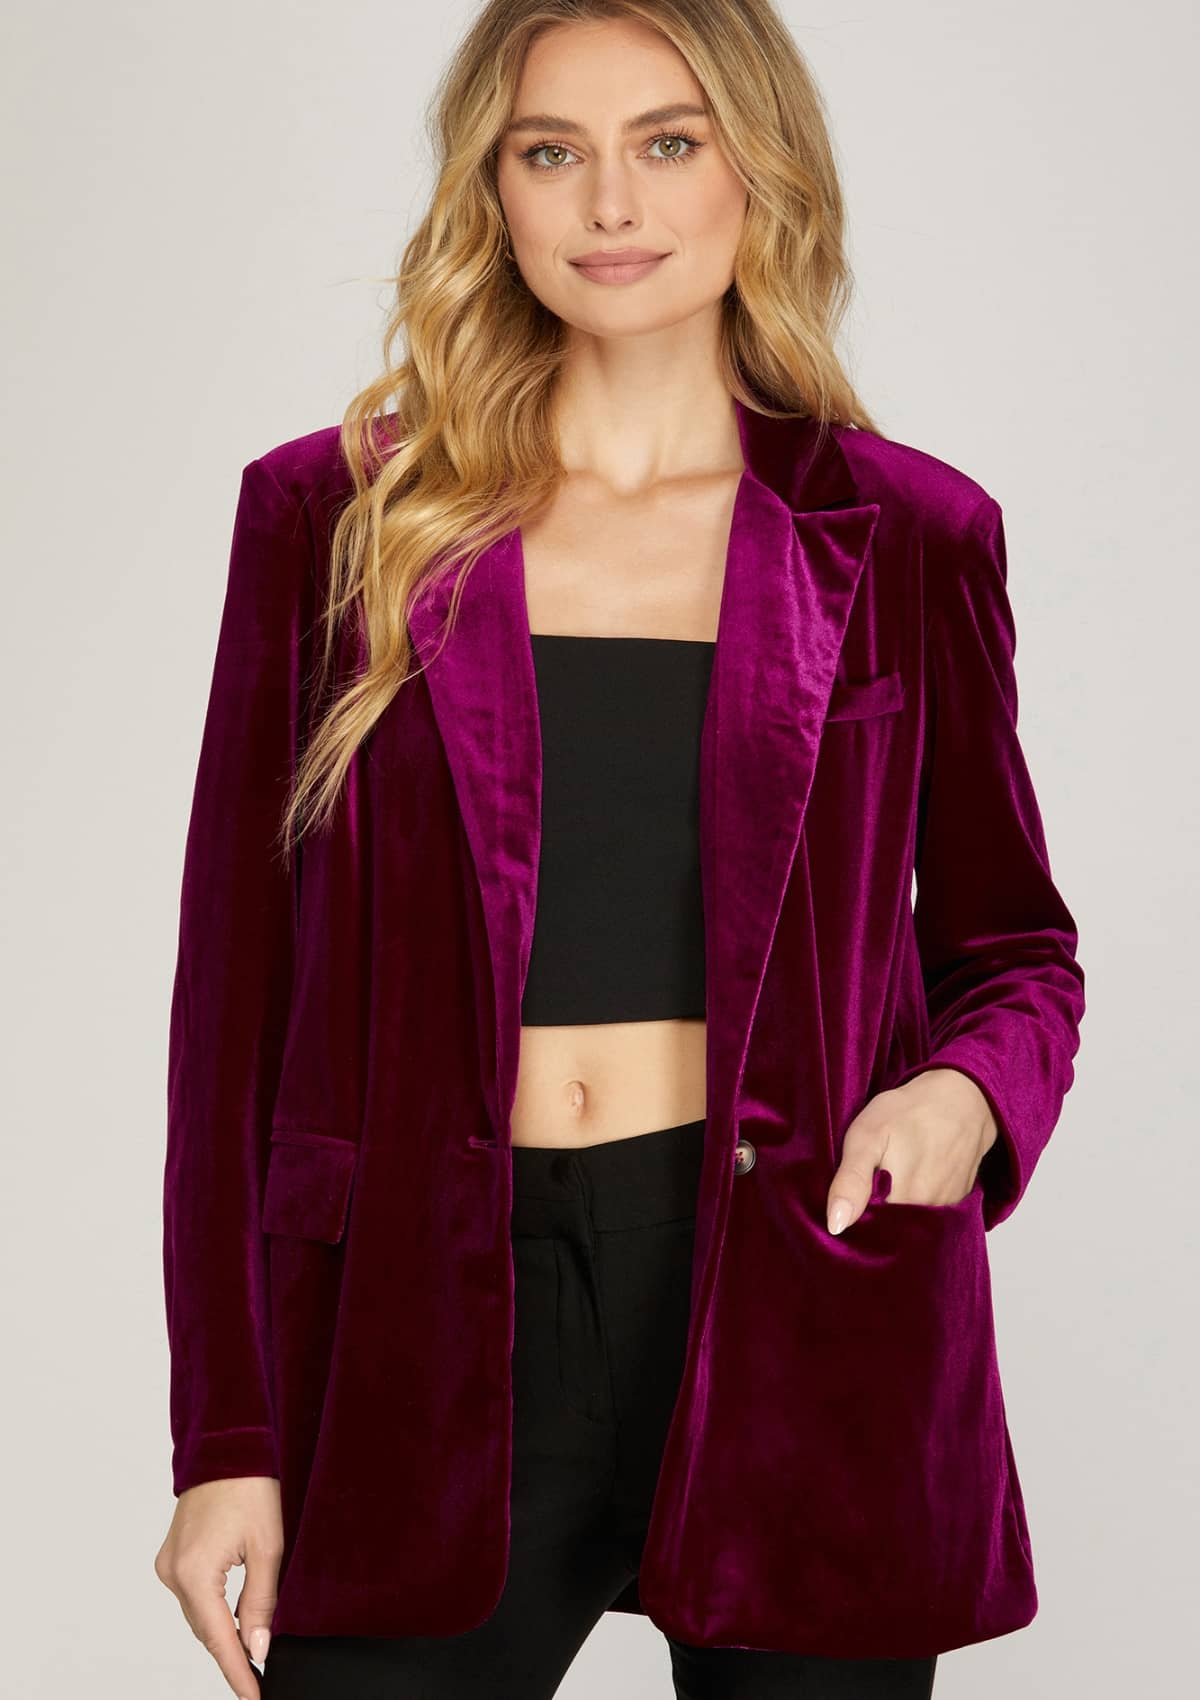 Purple velvet blazer paired with black cami top and black pants.